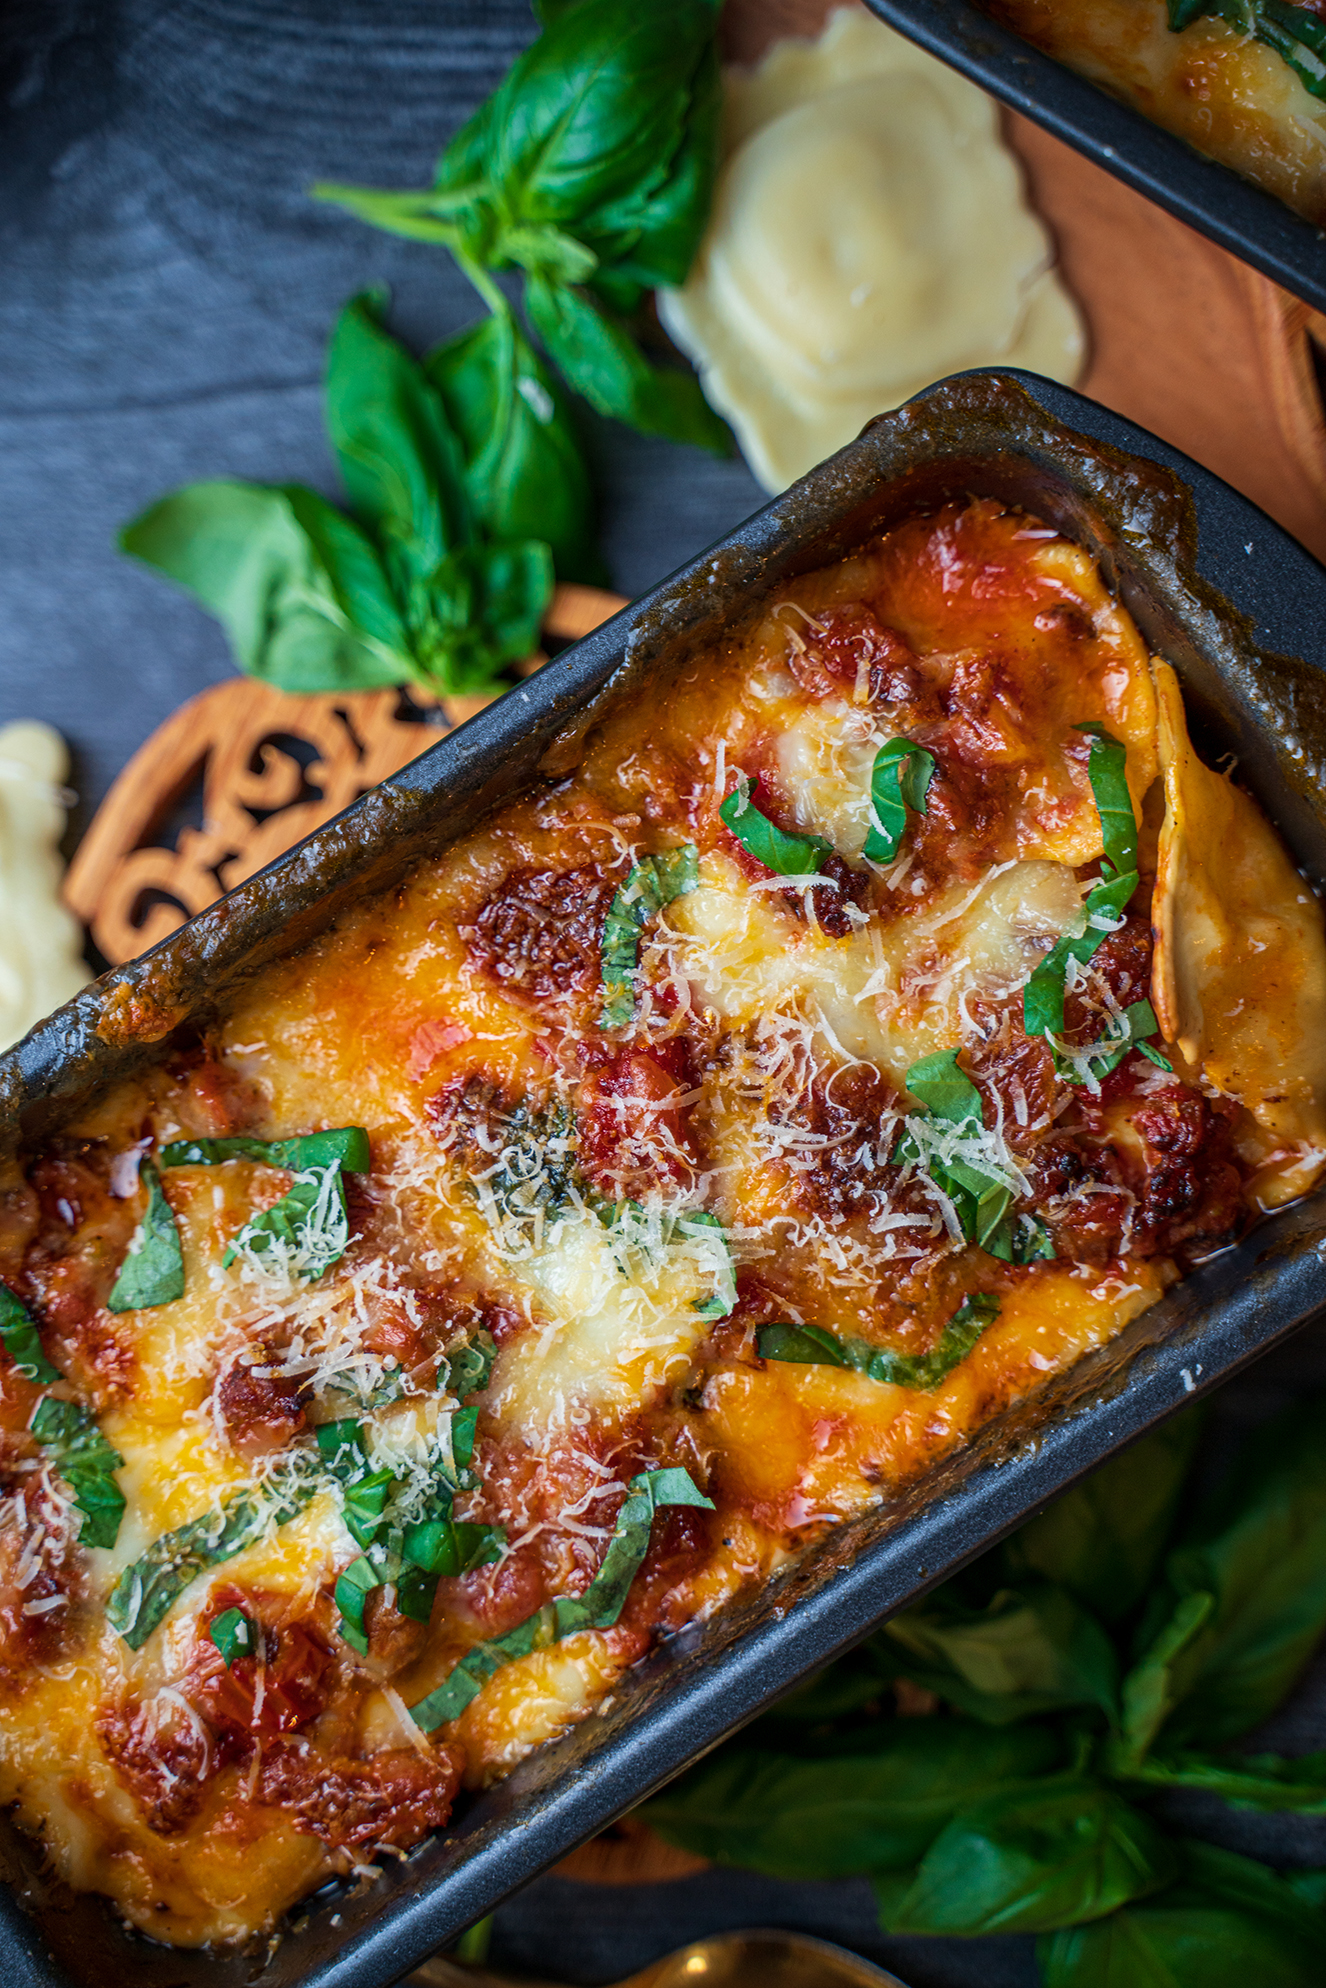 A deliciously gooey lasagna recipe where the noodles are swapped out for ravioli!